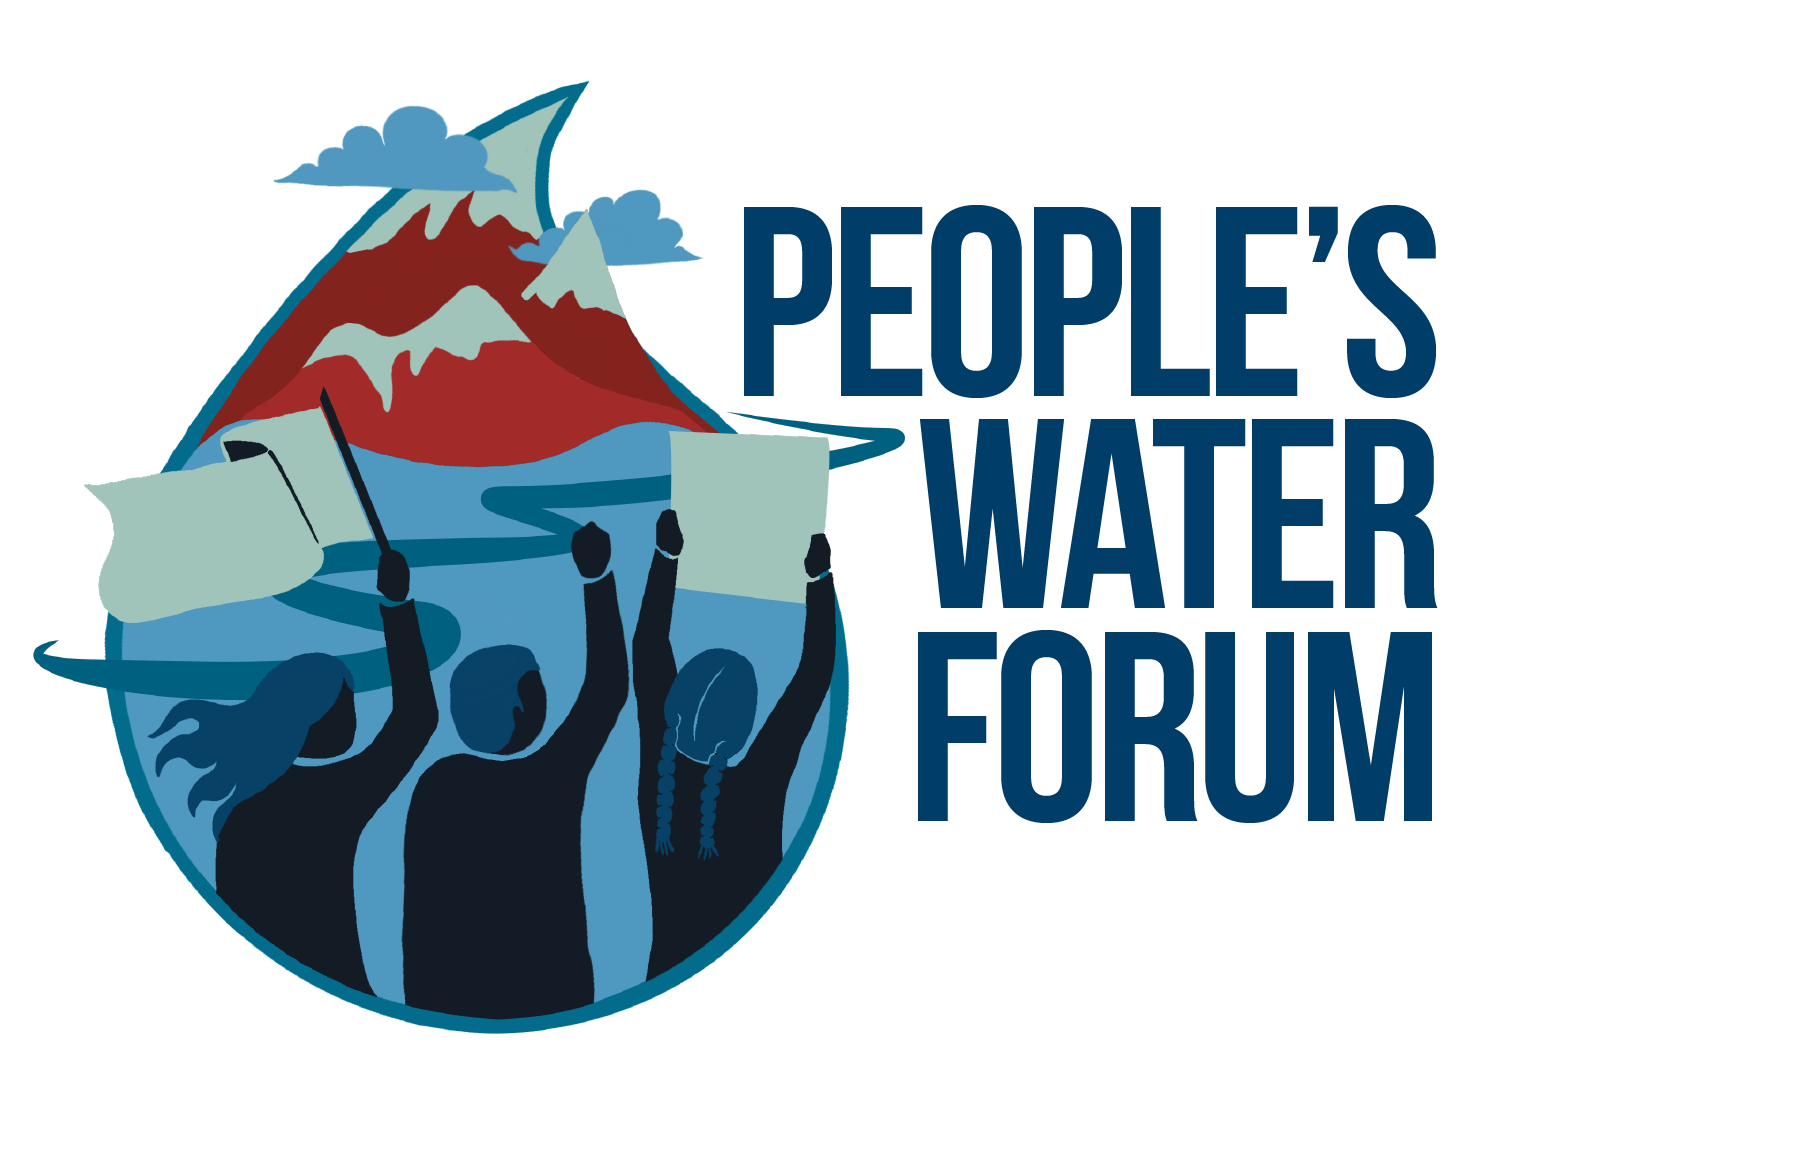 The People's Water Forum